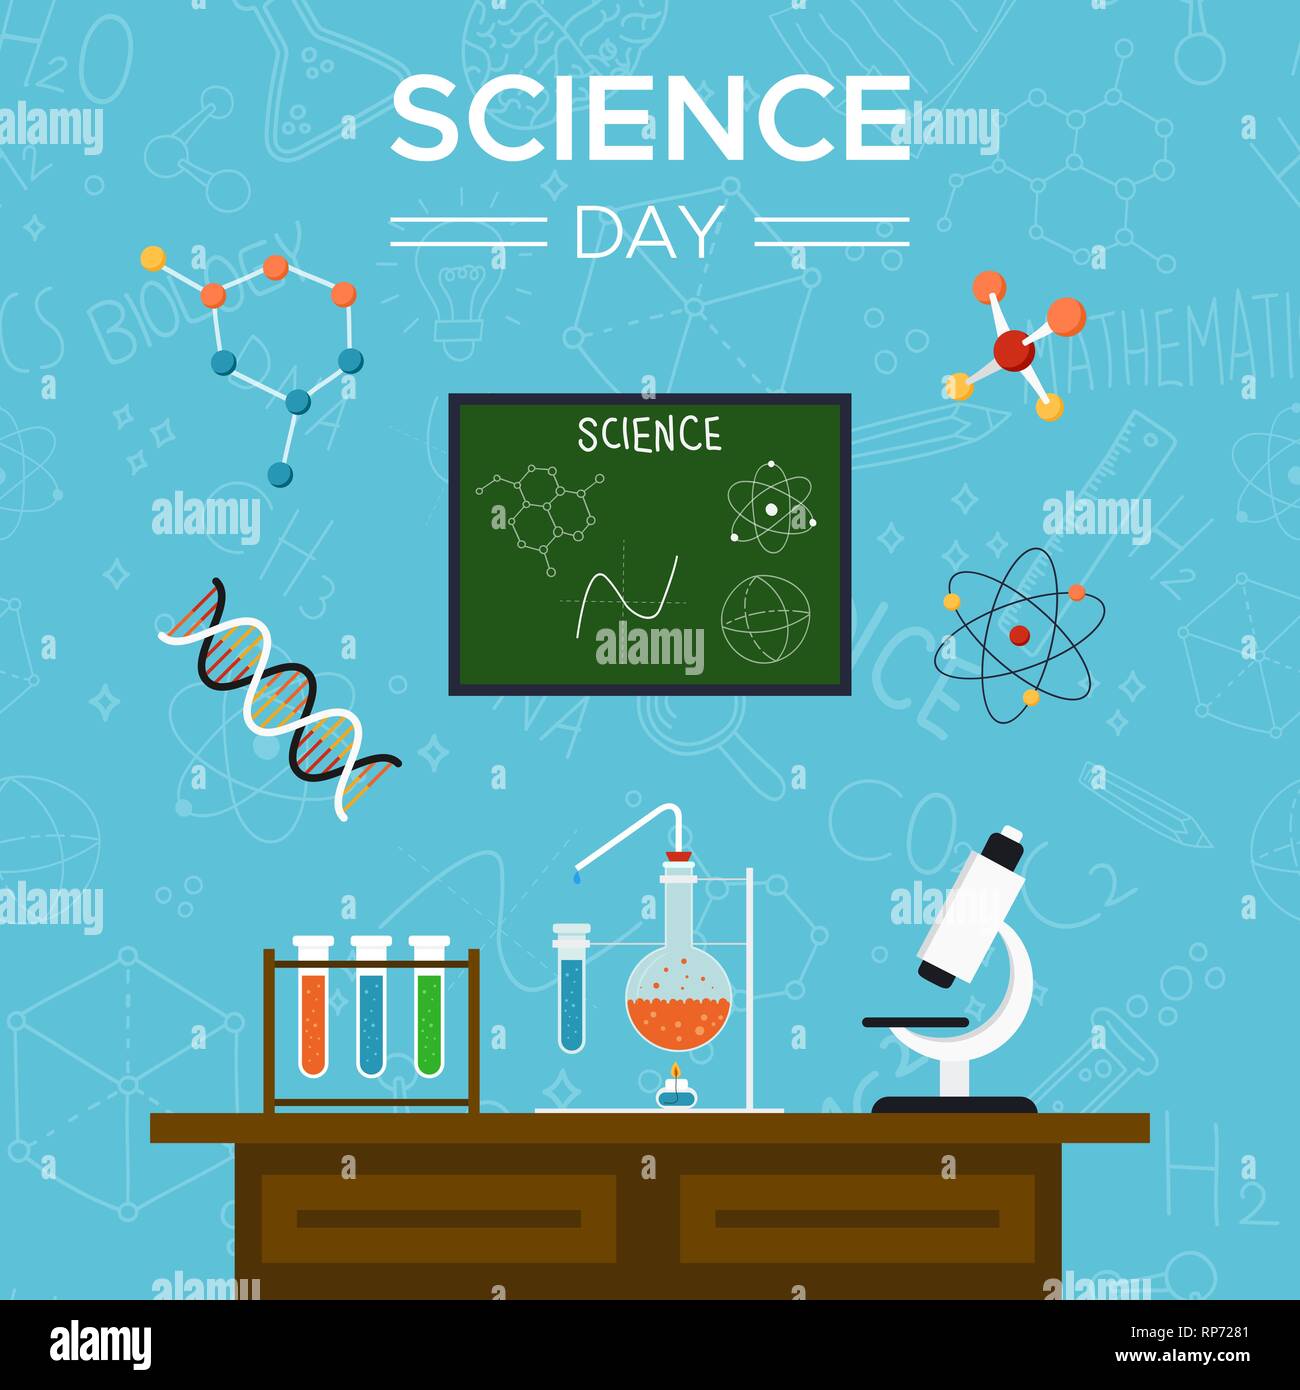 Science Day Greeting Card Illustration Of School Desk With Scientific Tools For Education Concept Stock Vector Image Art Alamy